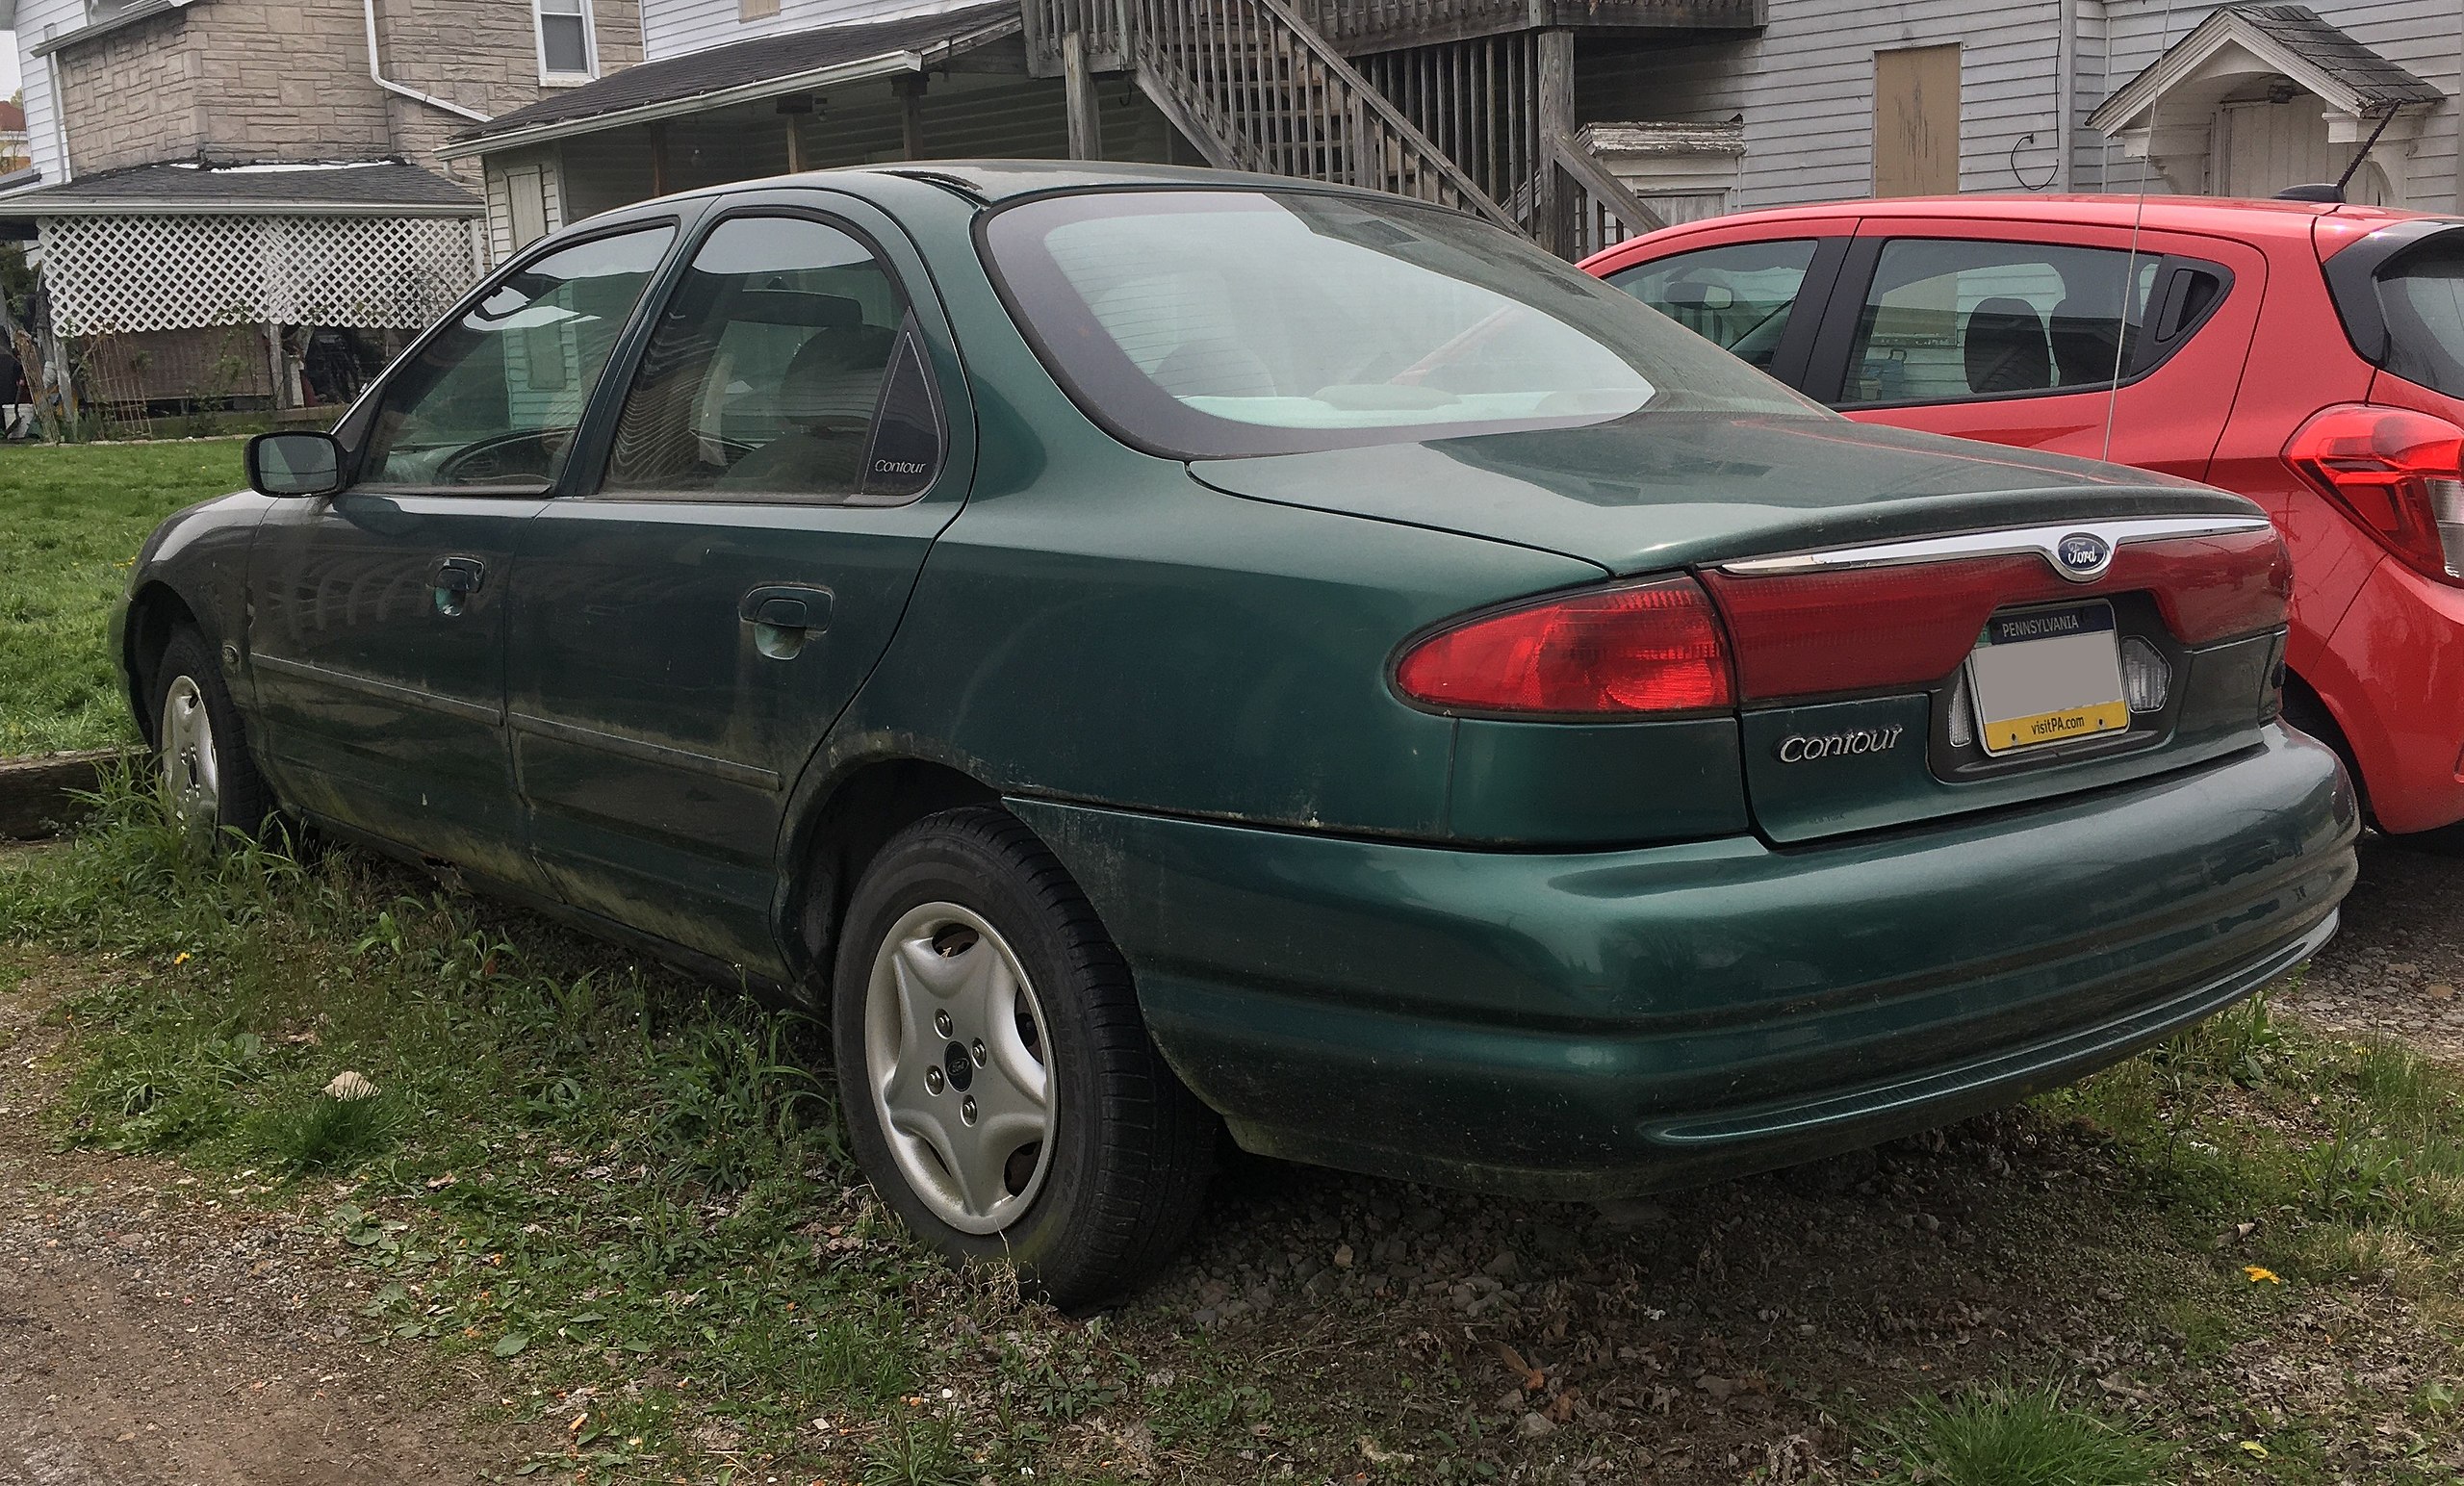 File:2000 Ford Contour, rear left, 4-24-2021.jpg - Wikimedia Commons